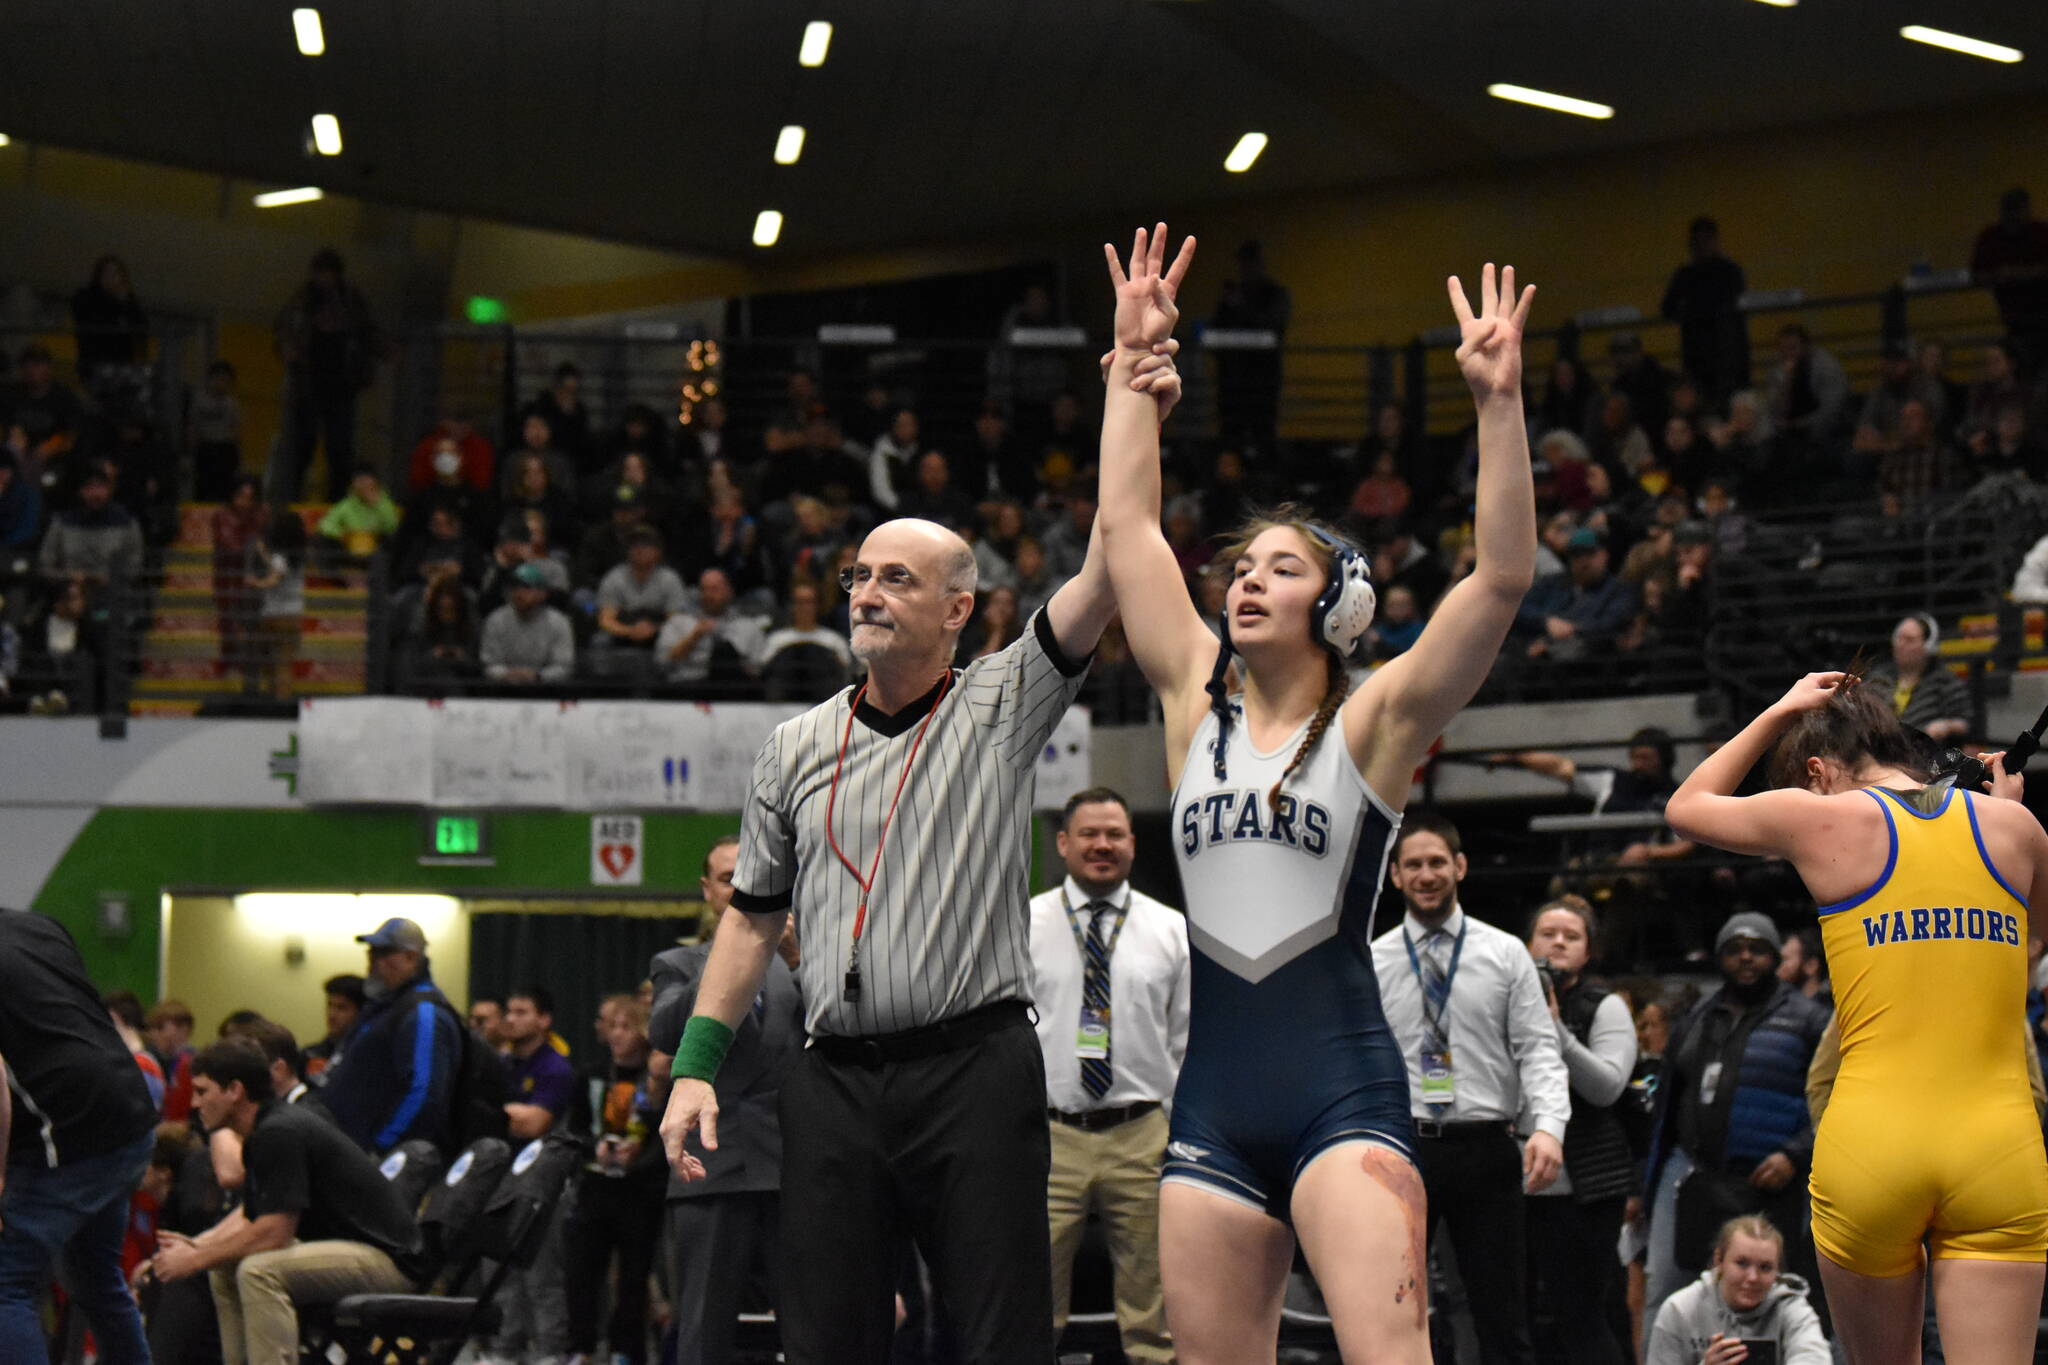 Soldotna senior Trinity Donovan celebrates her fourth state championship Saturday, Dec. 17, 2022, at the Girls state wrestling tournament at the Alaska Airlines Center in Anchorage, Alaska. (Photo by Jeff Helminiak/Peninsula Clarion)